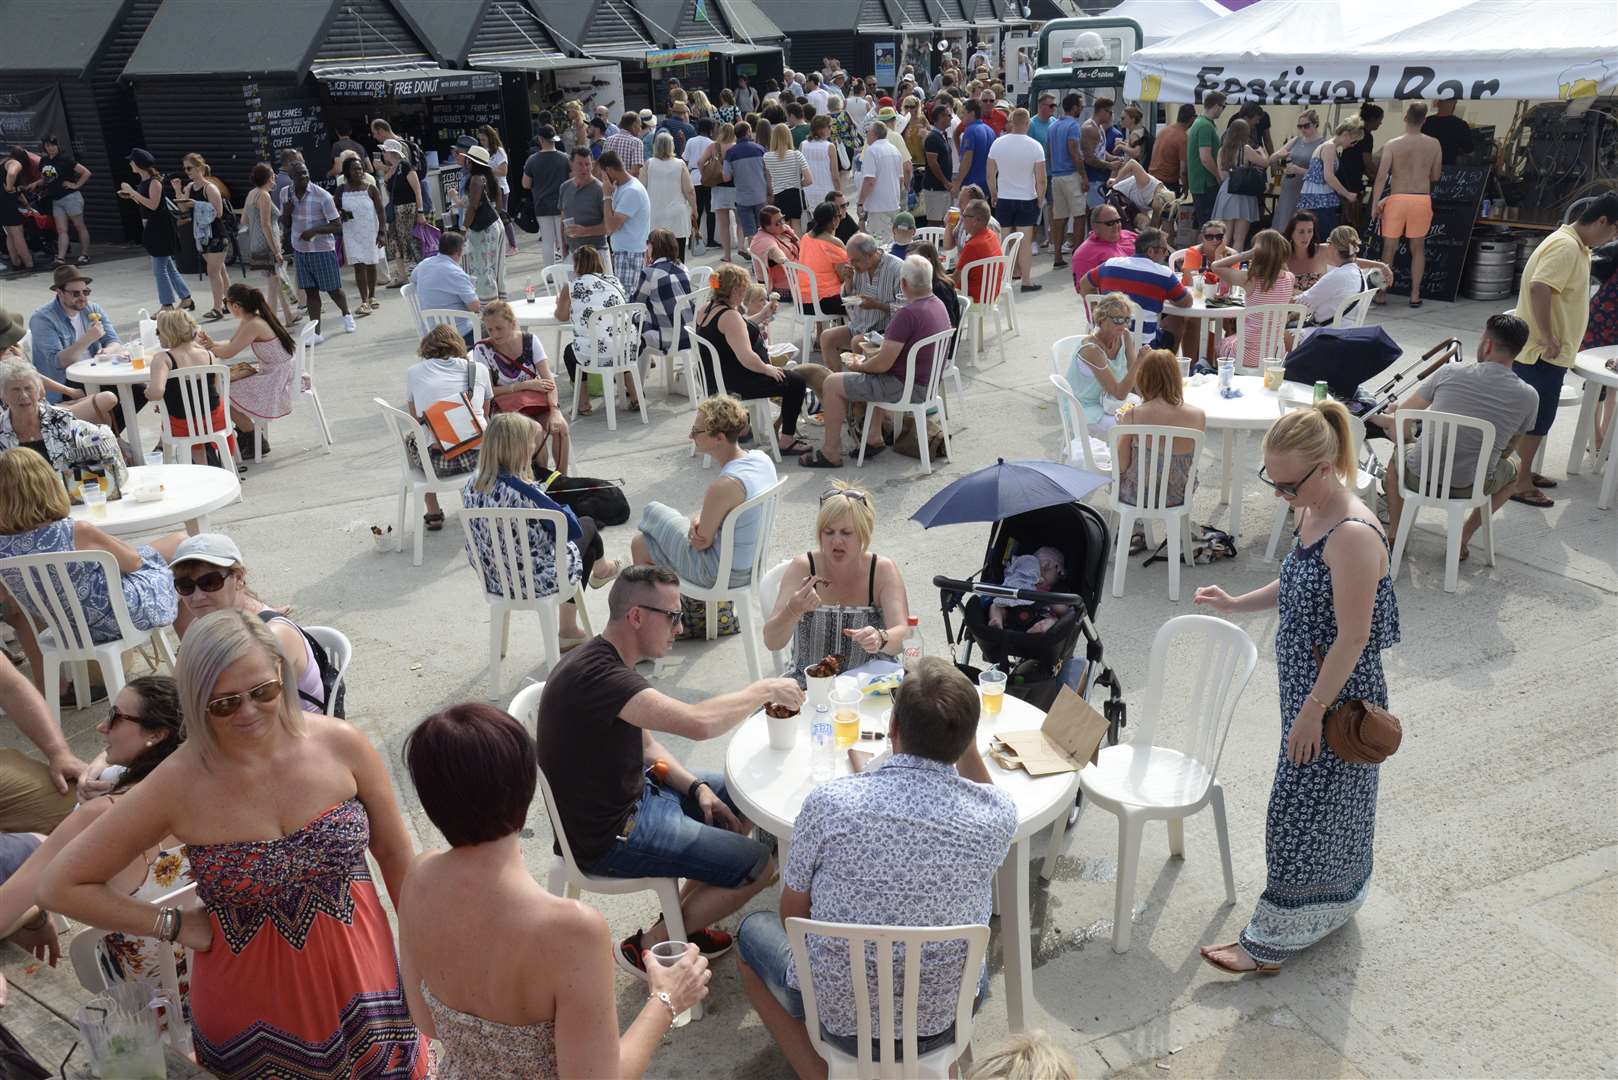 The Oyster Festival is one of the biggest summer events in Kent